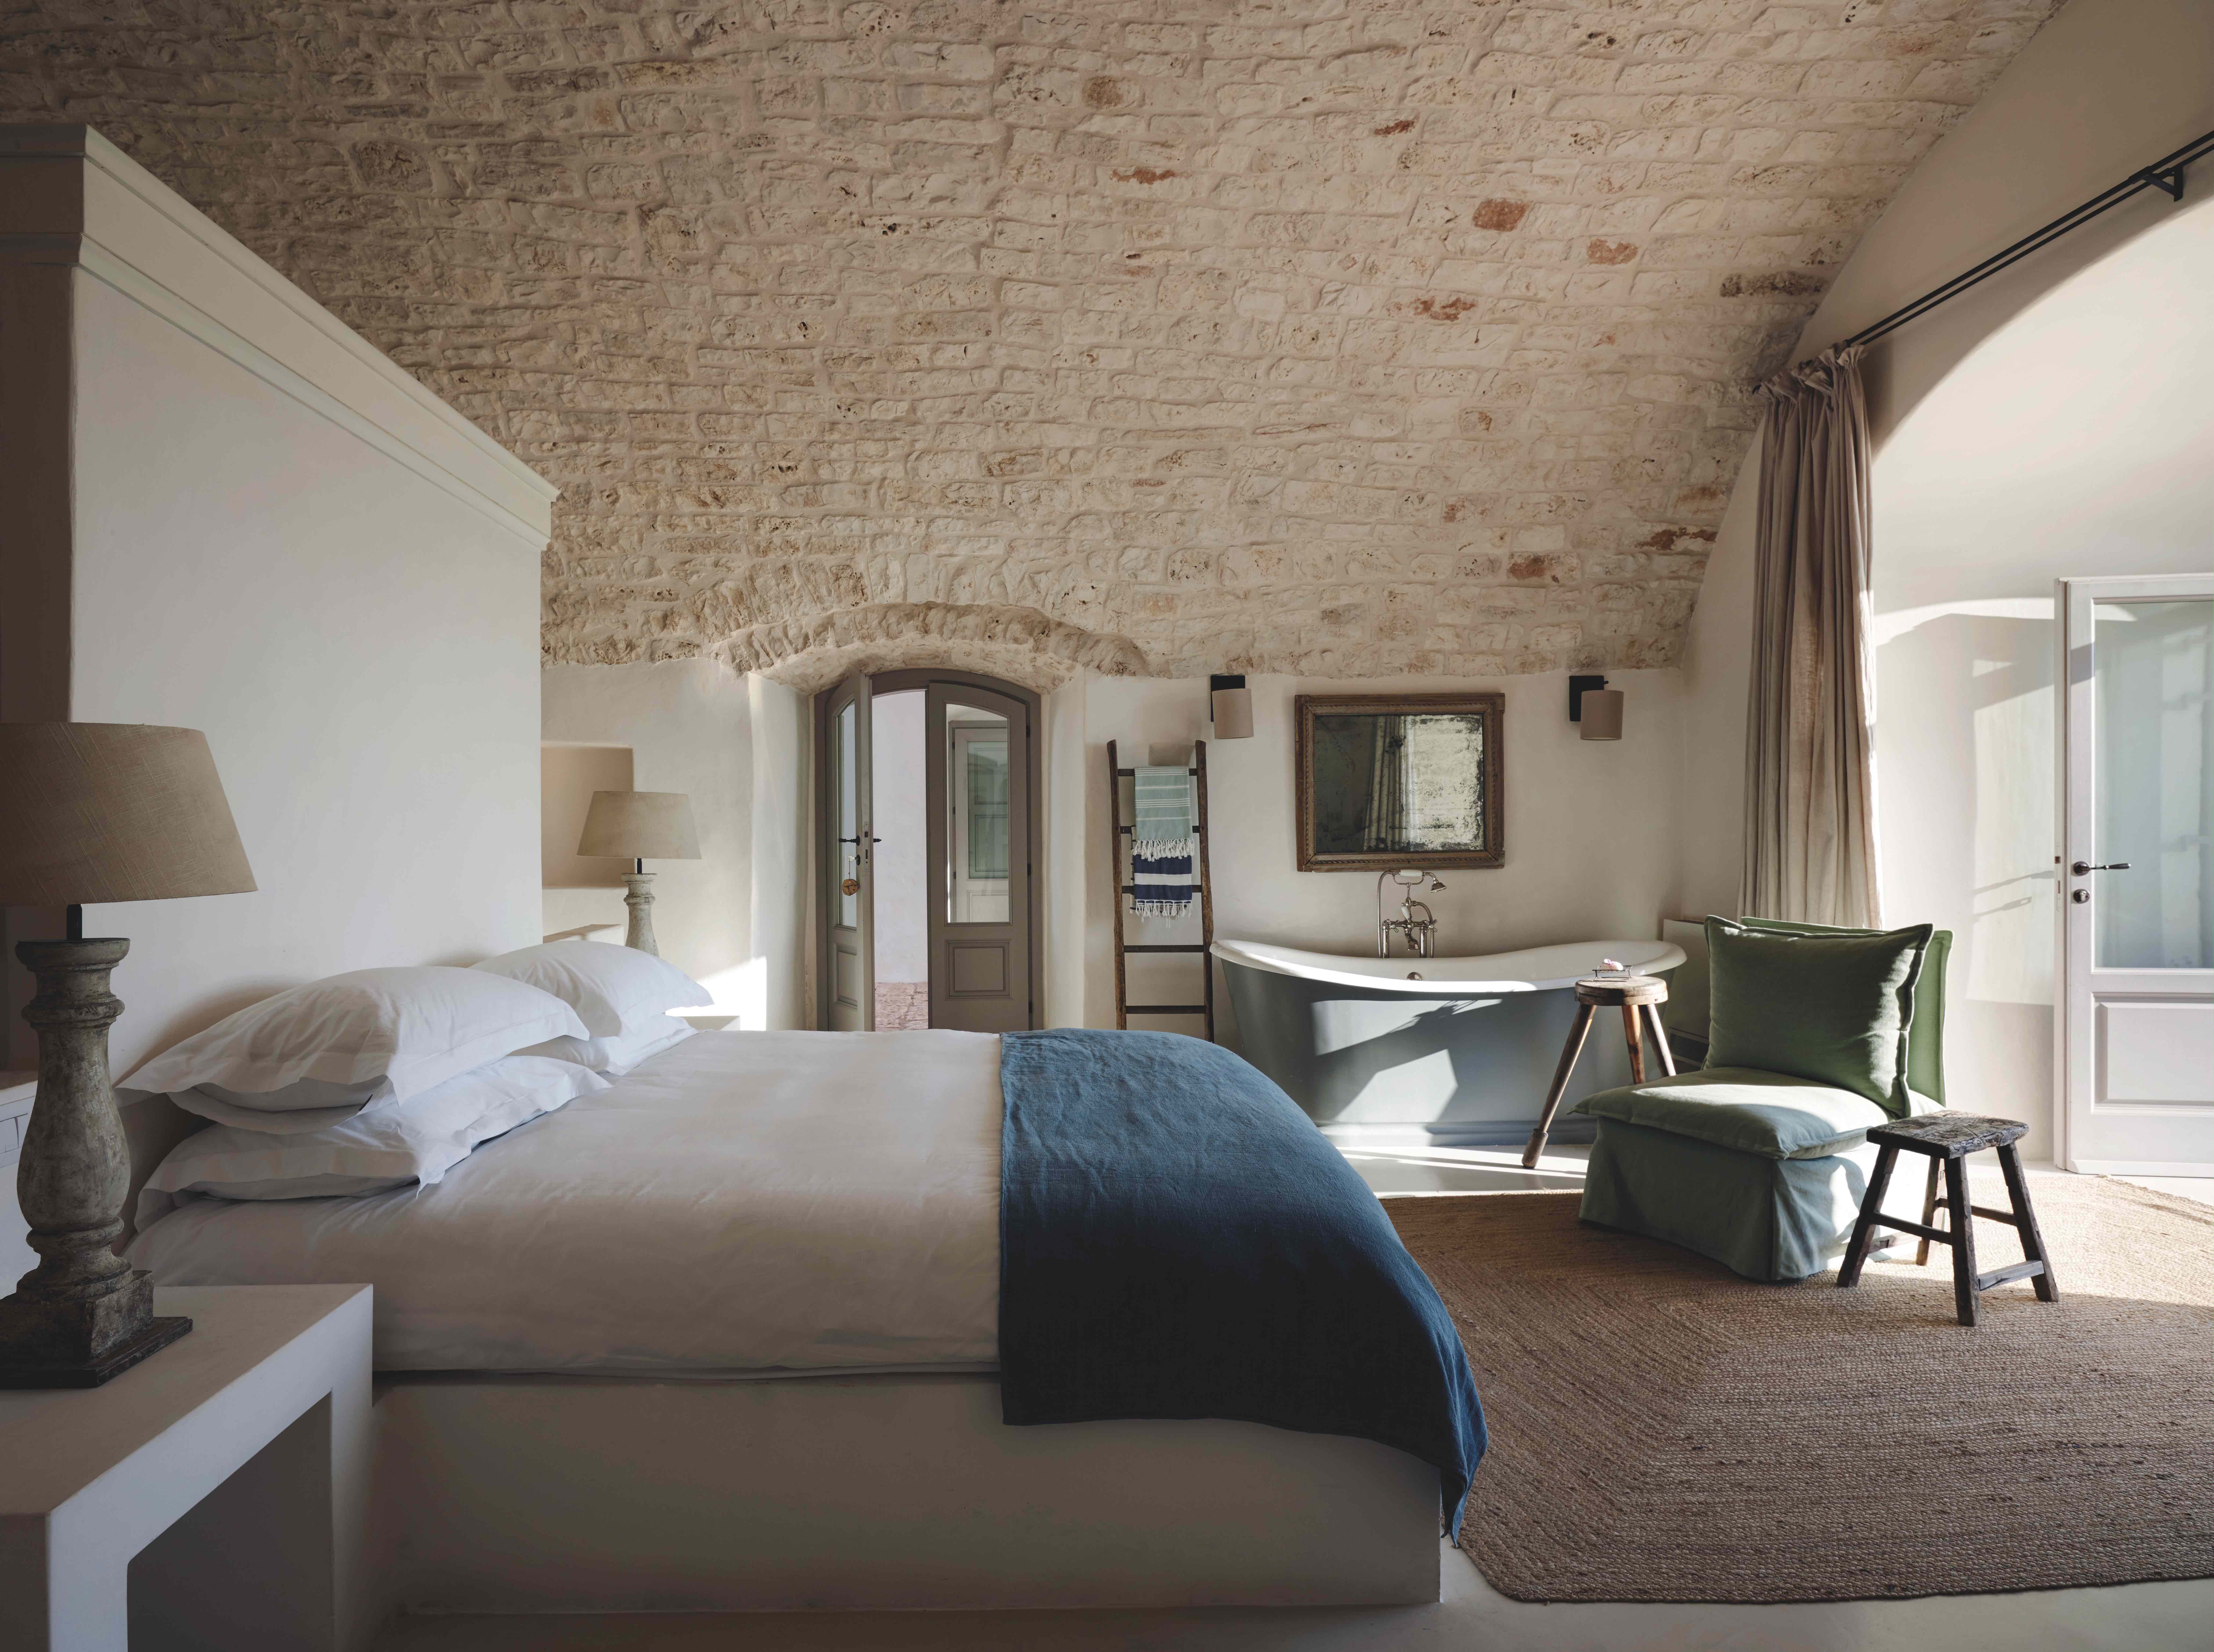 The natural stone walls of 300-year-old Puglia farmhouse speak for themselves